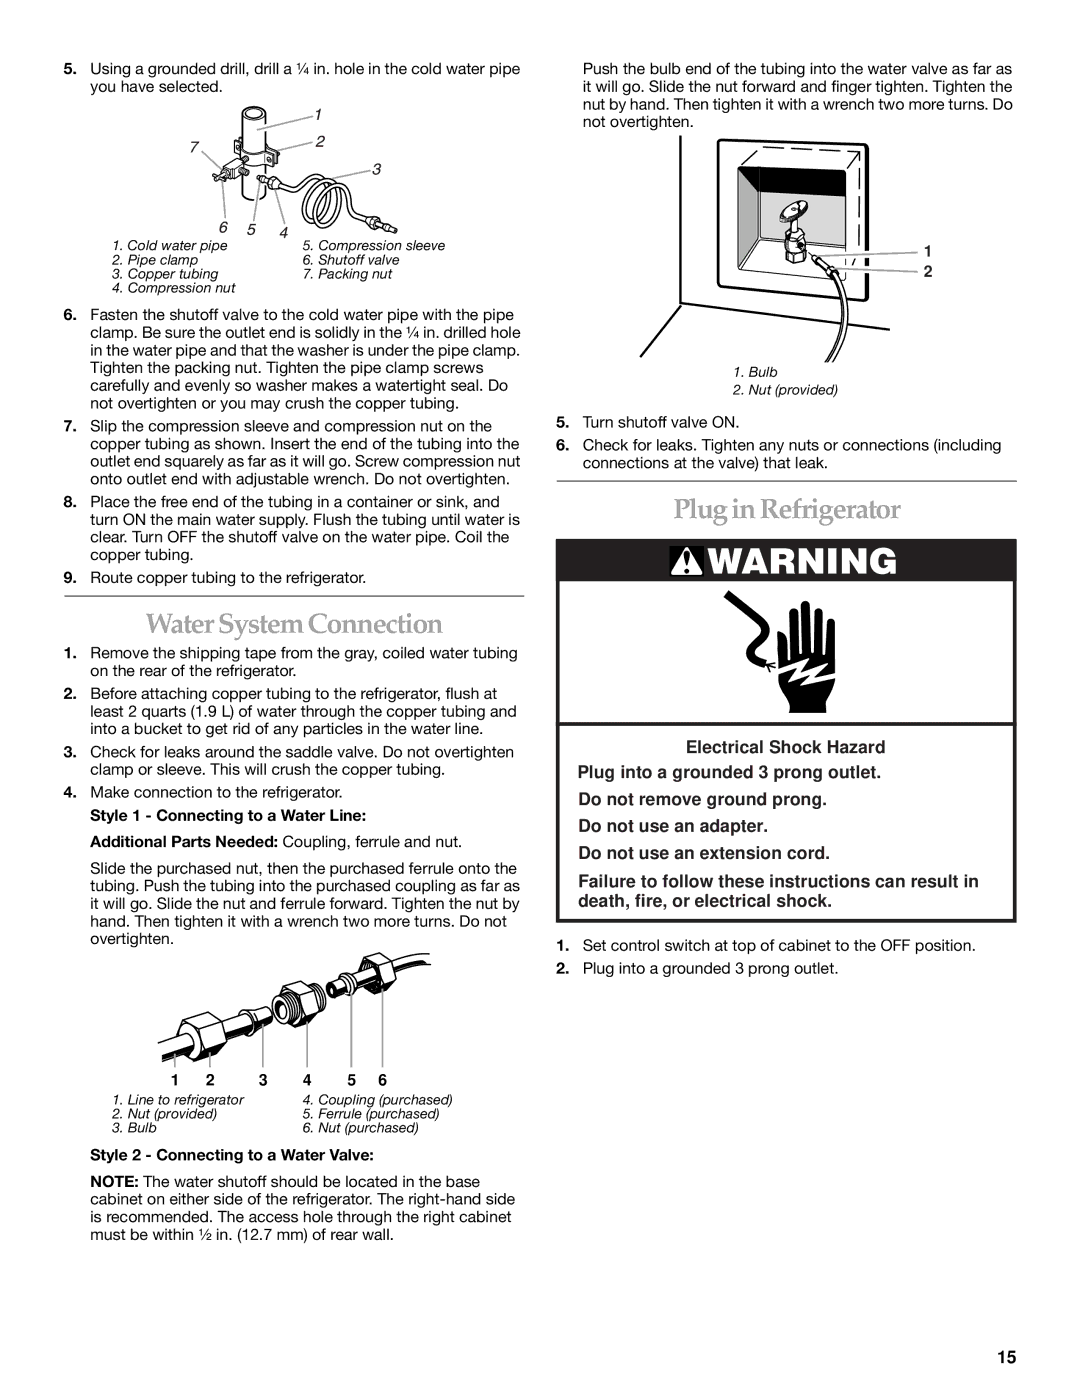 KitchenAid 2266877 manual Water System Connection, Plug in Refrigerator, Style 1 Connecting to a Water Line 